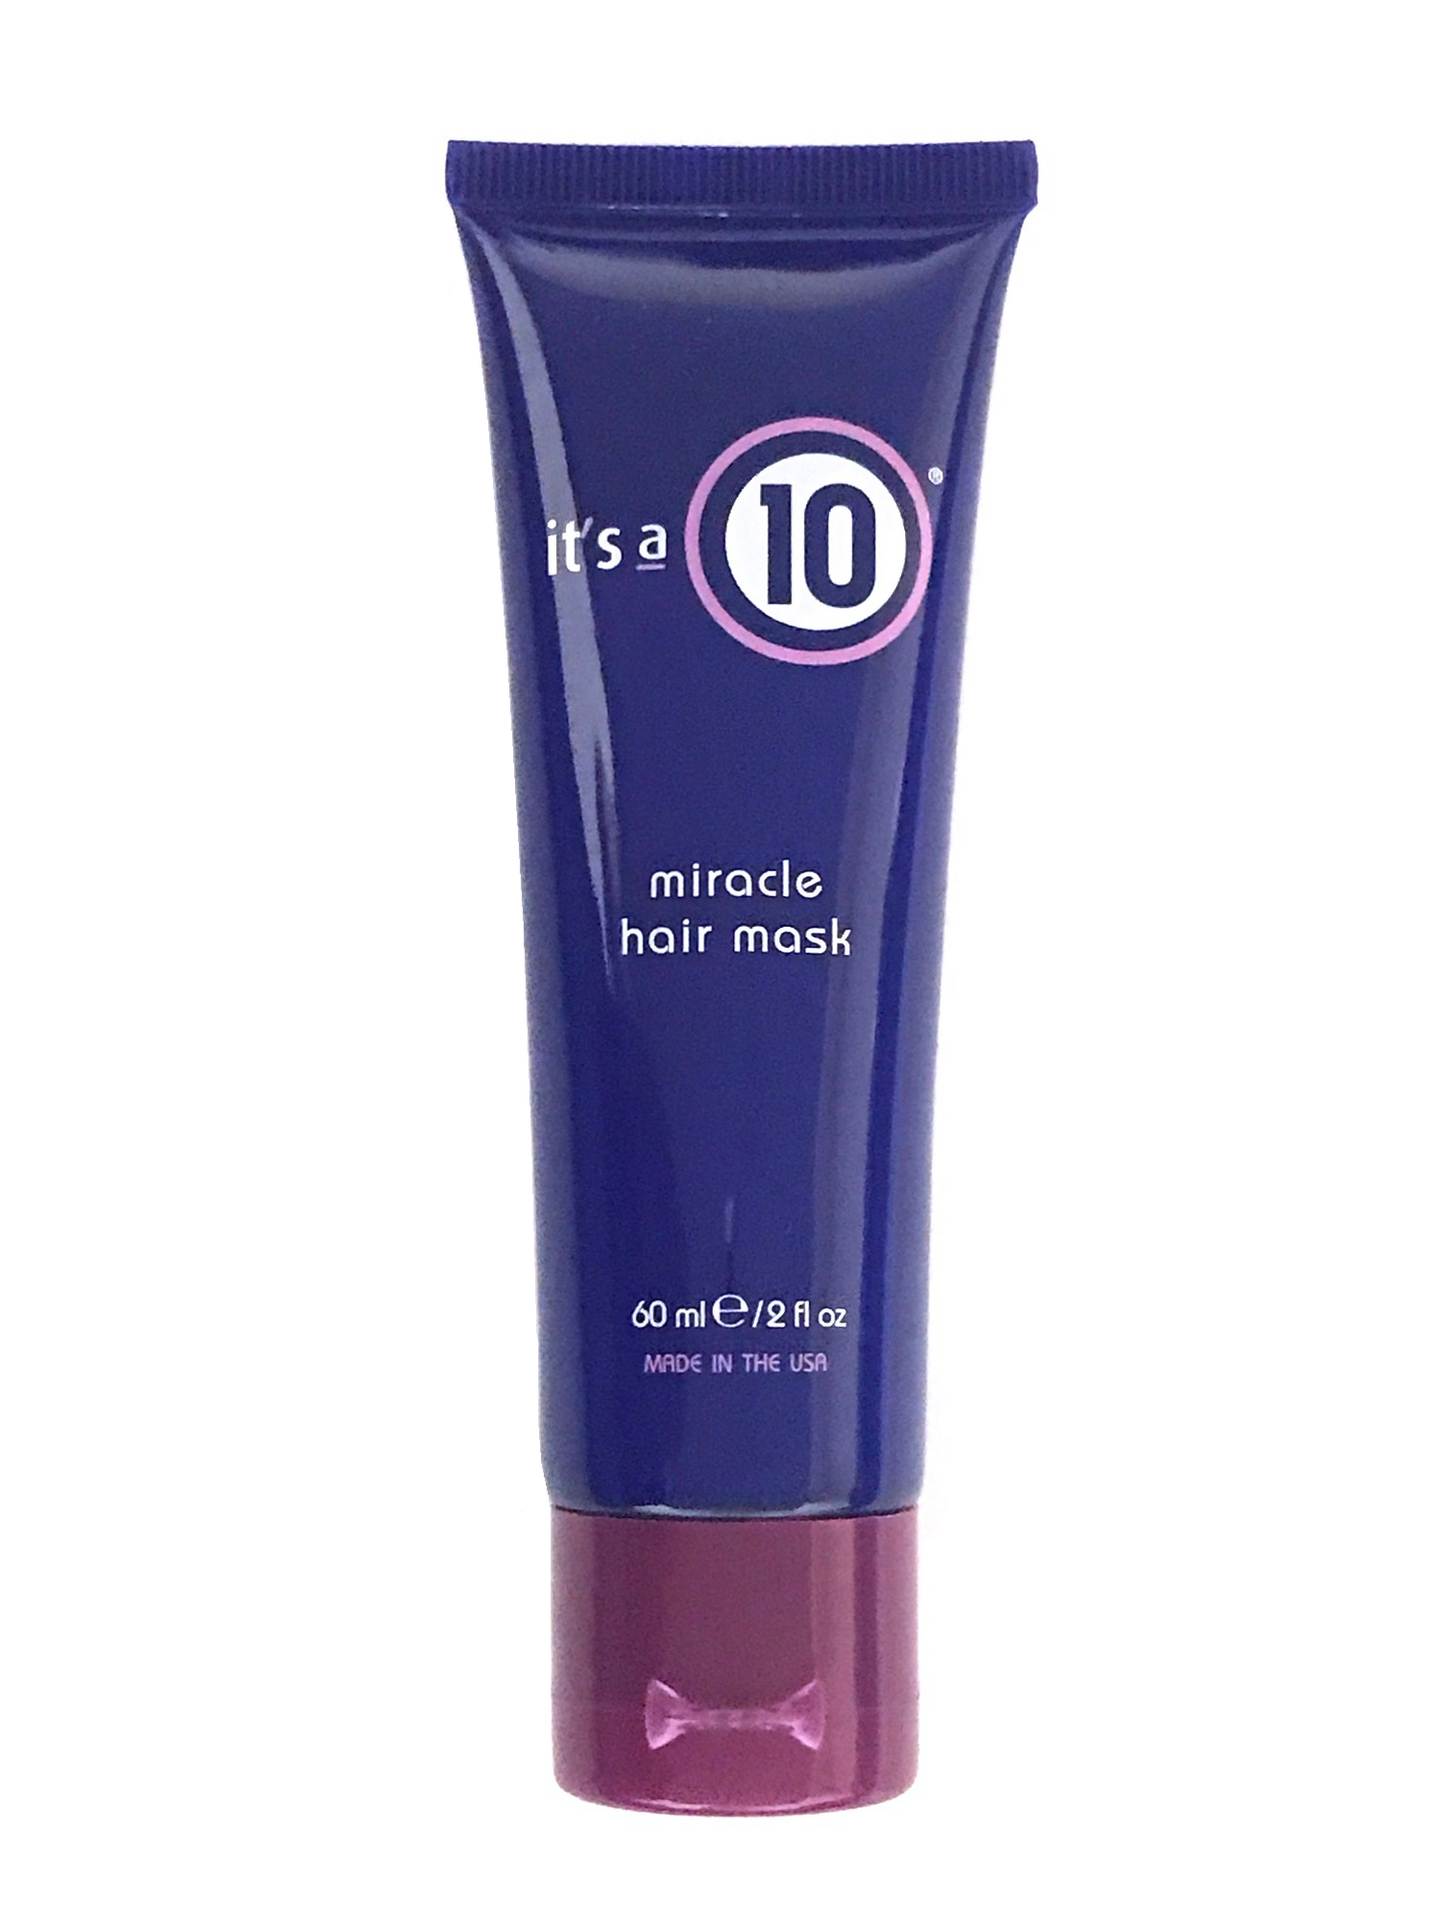 It's A 10 Miracle Hair Mask 2 Oz